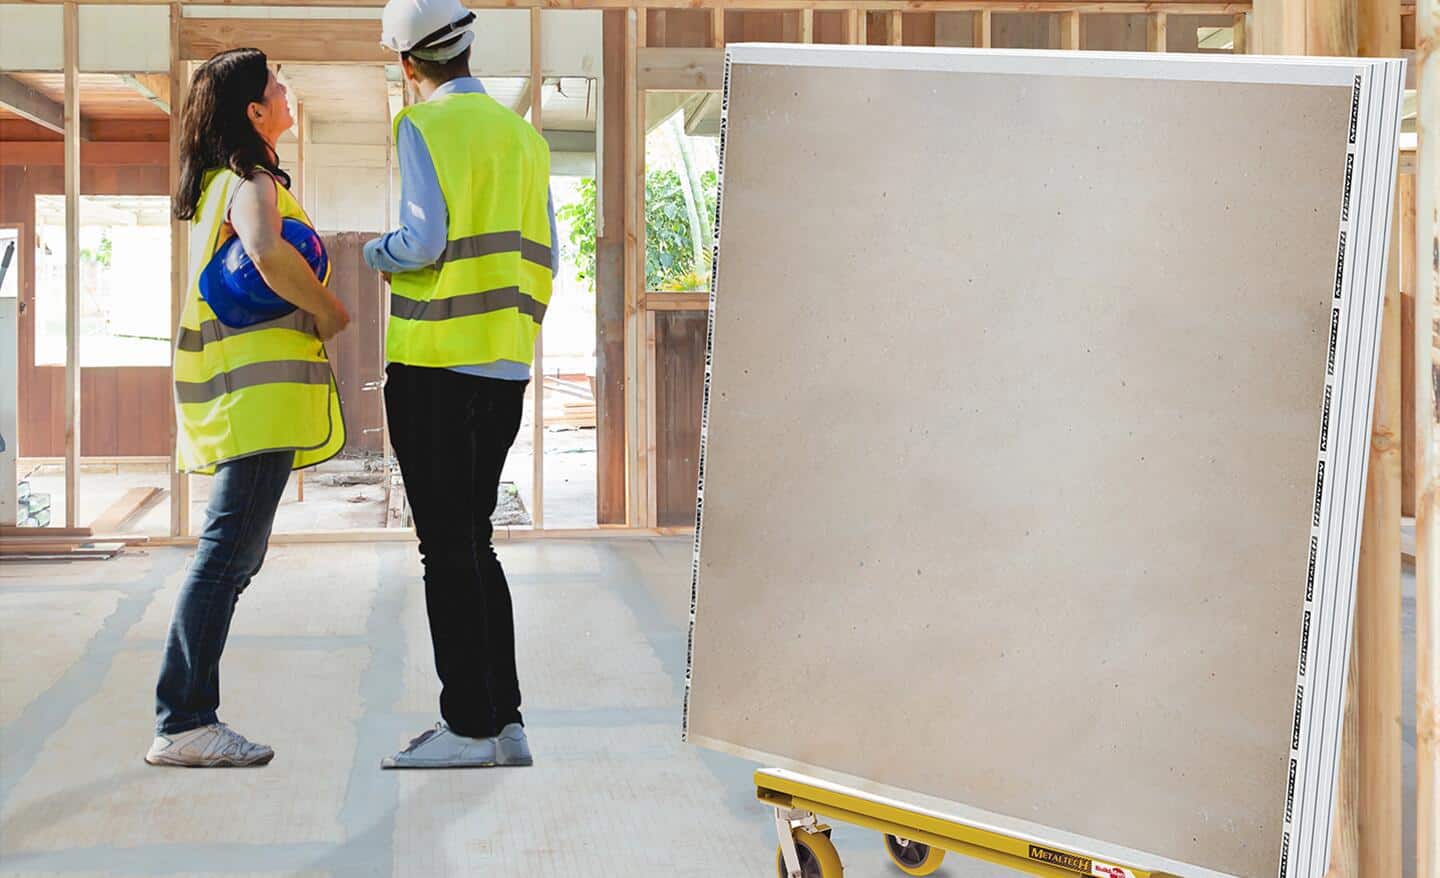 Two workers stand next to a stack of drywall sheets propped up in a stand. The workers are looking at the interior frame of the room that has no drywall installed.